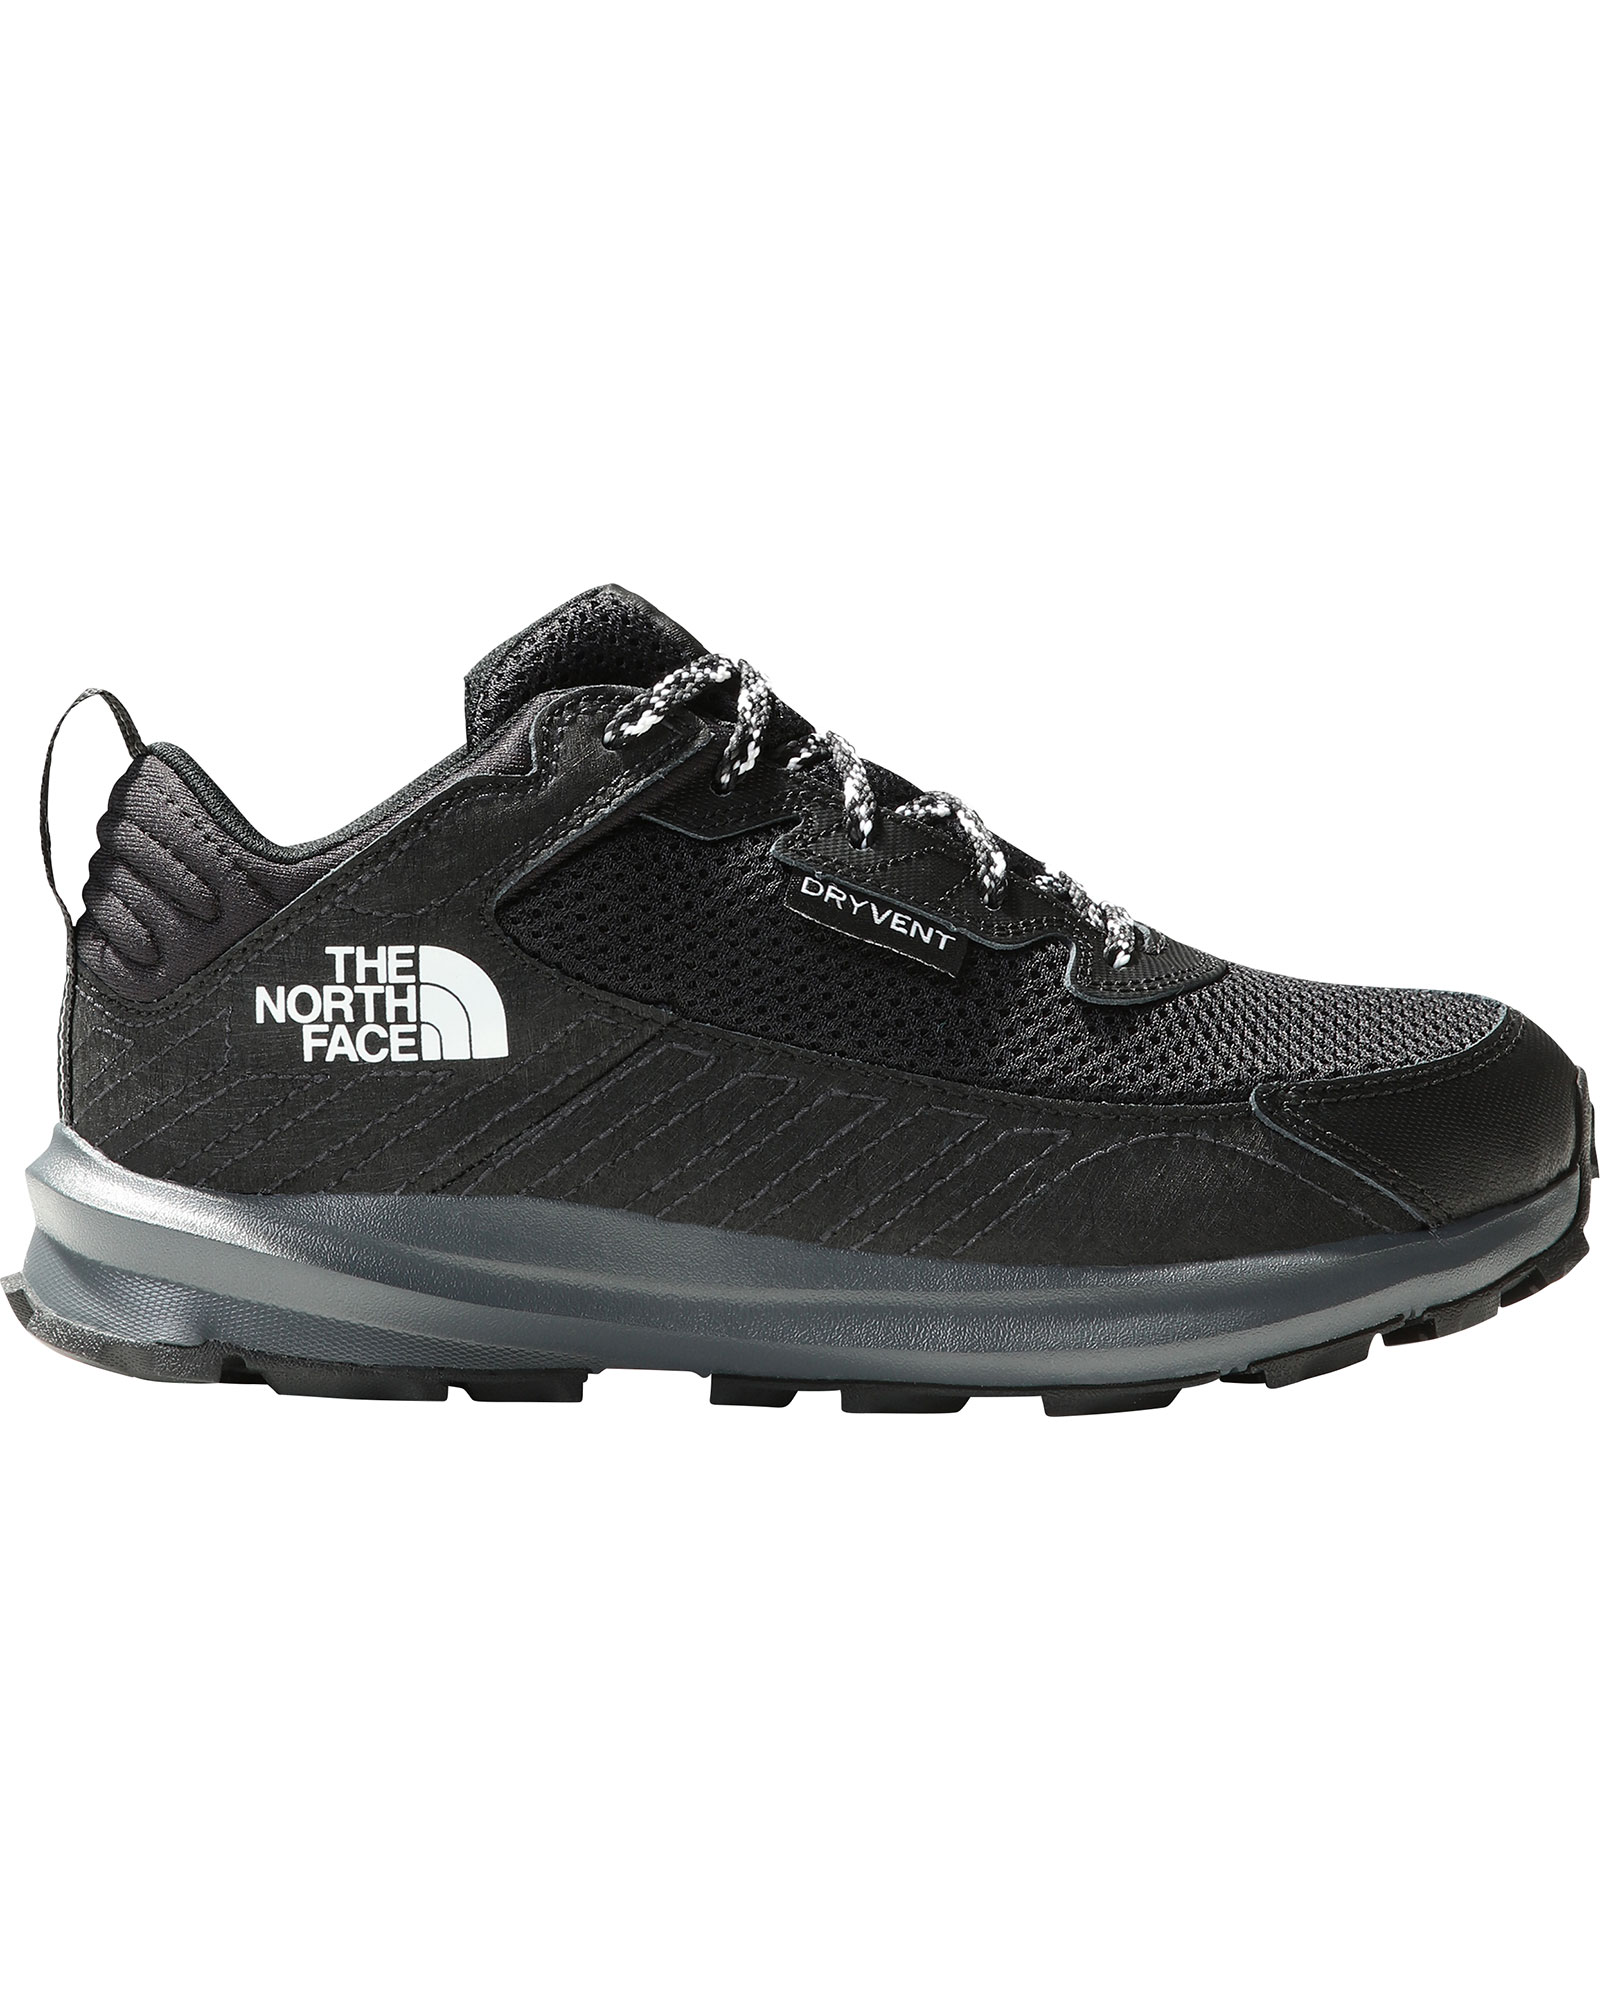 The North Face Youth Fastpack Hiker Kid’s Waterproof Shoes - TNF Black/TNF Black UK 4